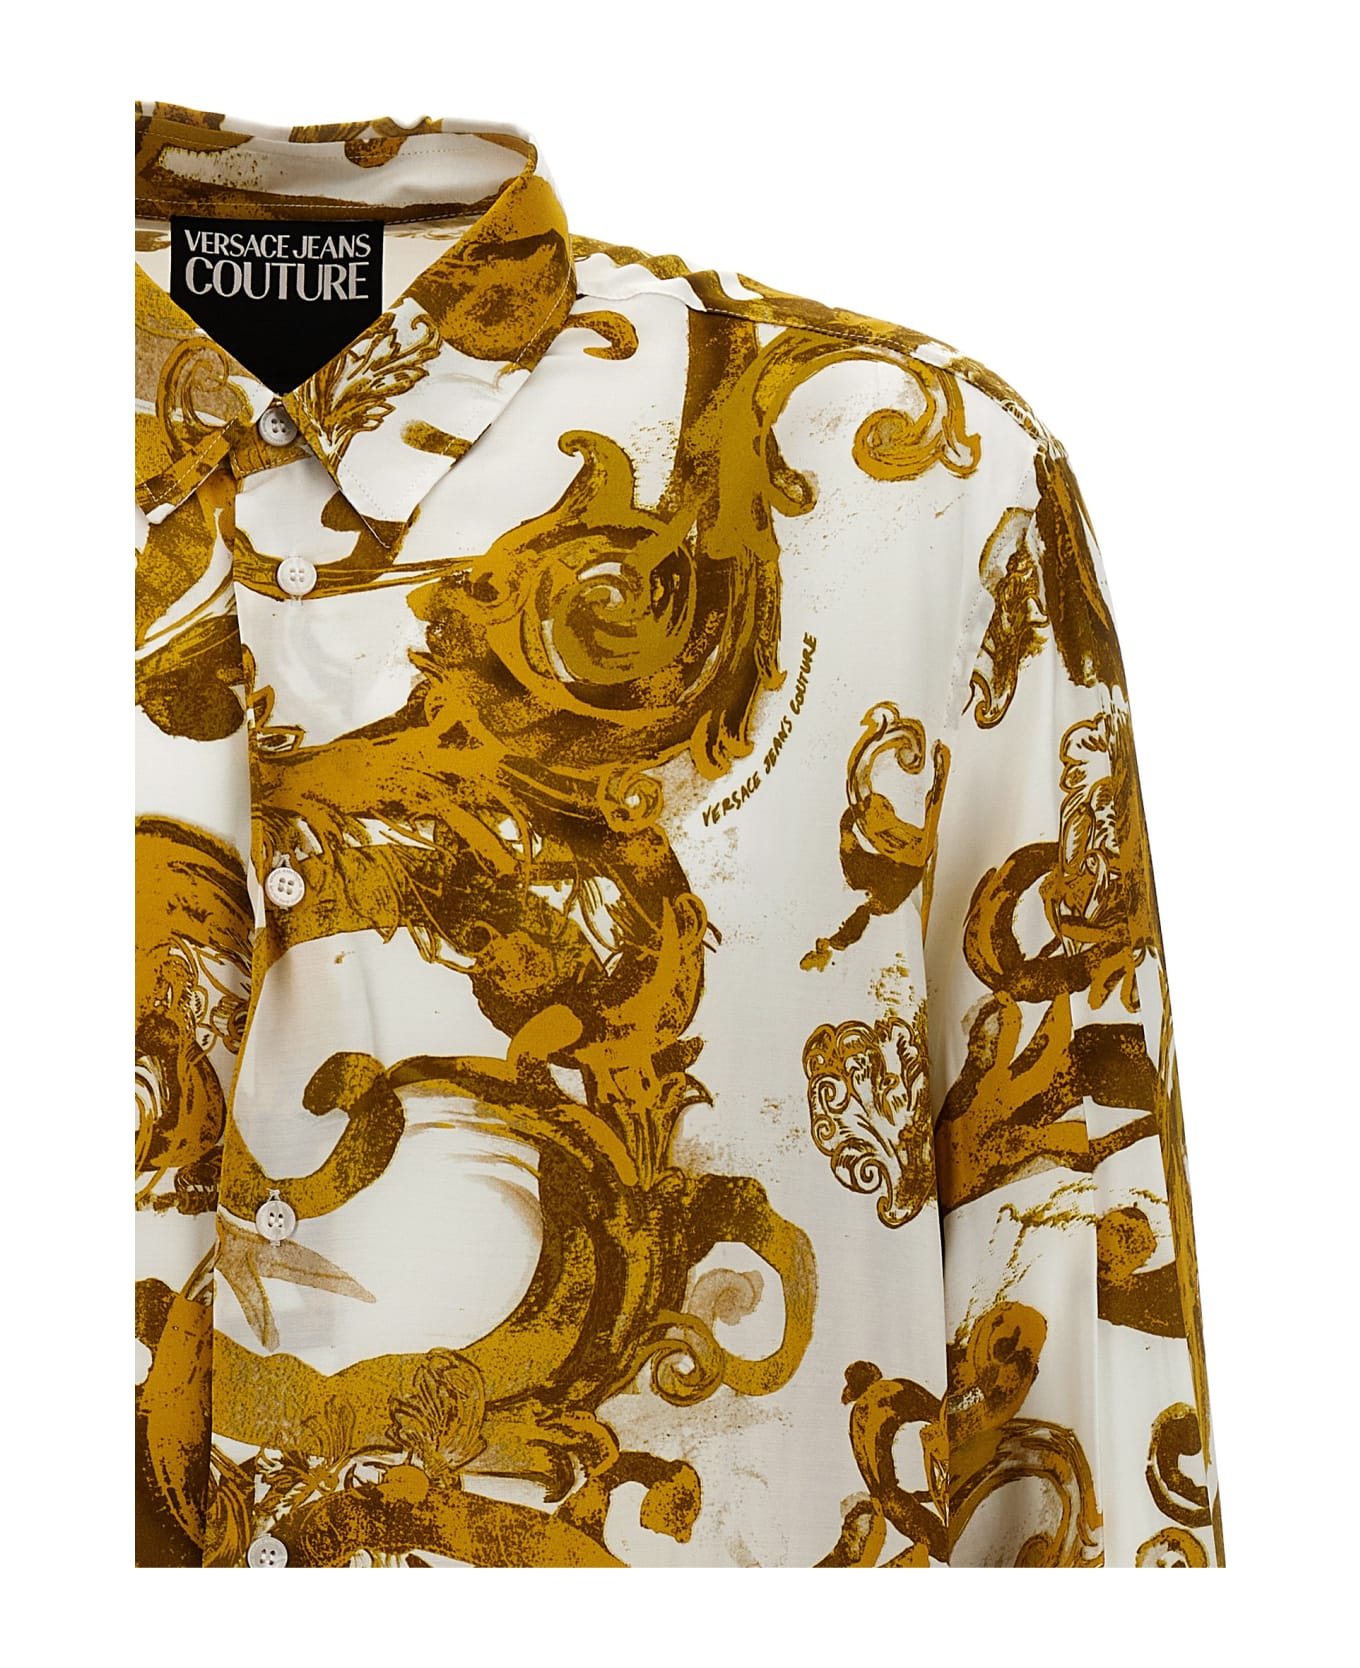 Versace Jeans Couture All Over Print Shirt - Multicolor